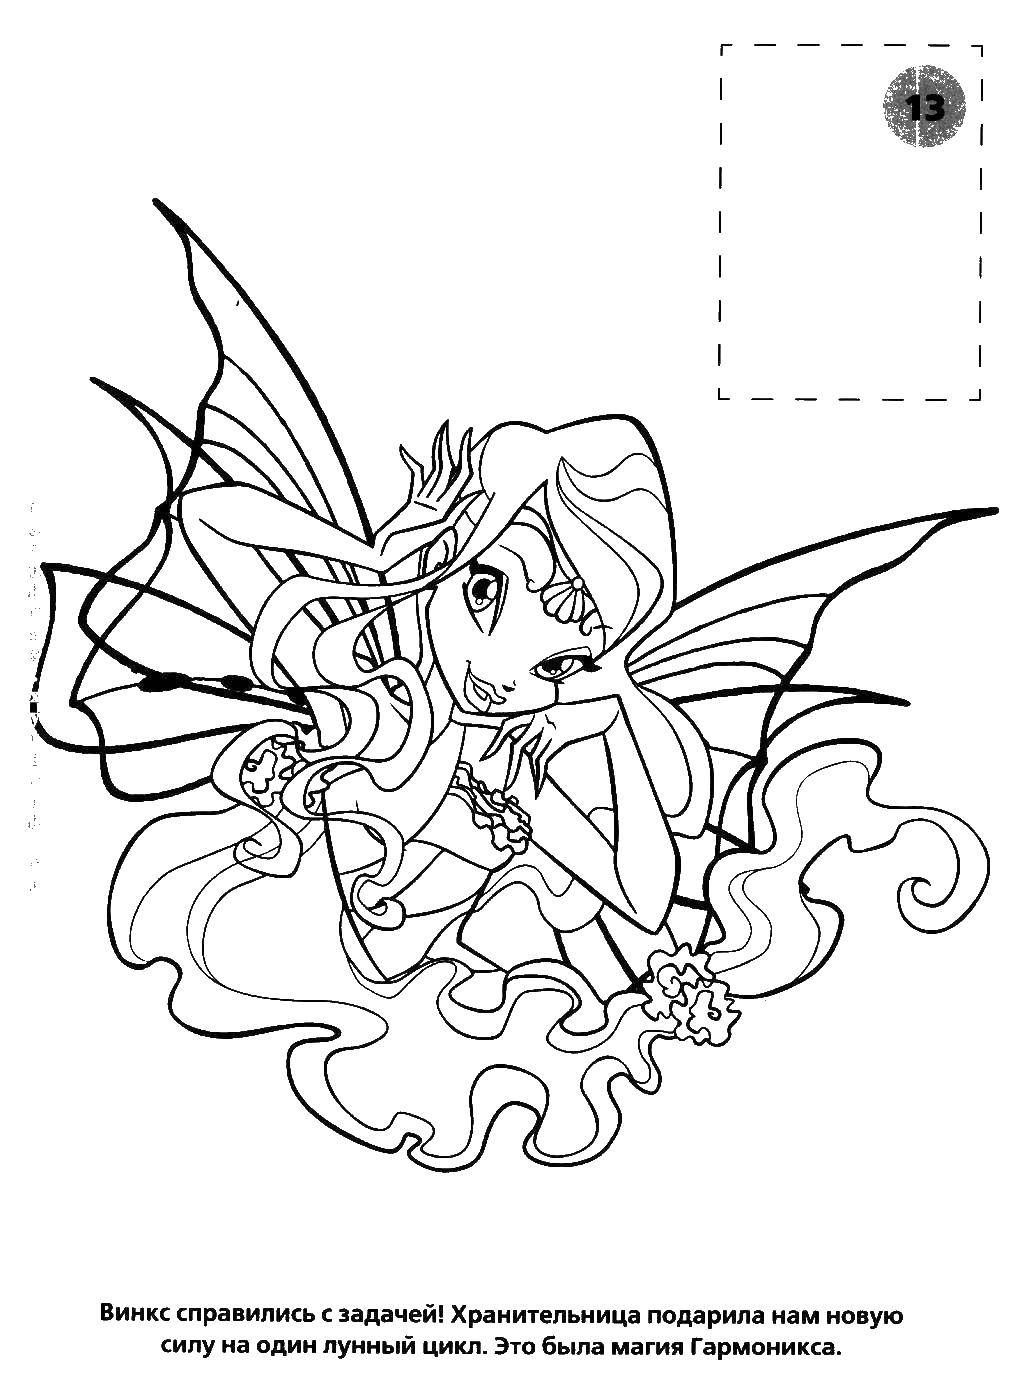 Coloring Layla, the fairy of winx club. Category Winx. Tags:  Winx, Fairies.